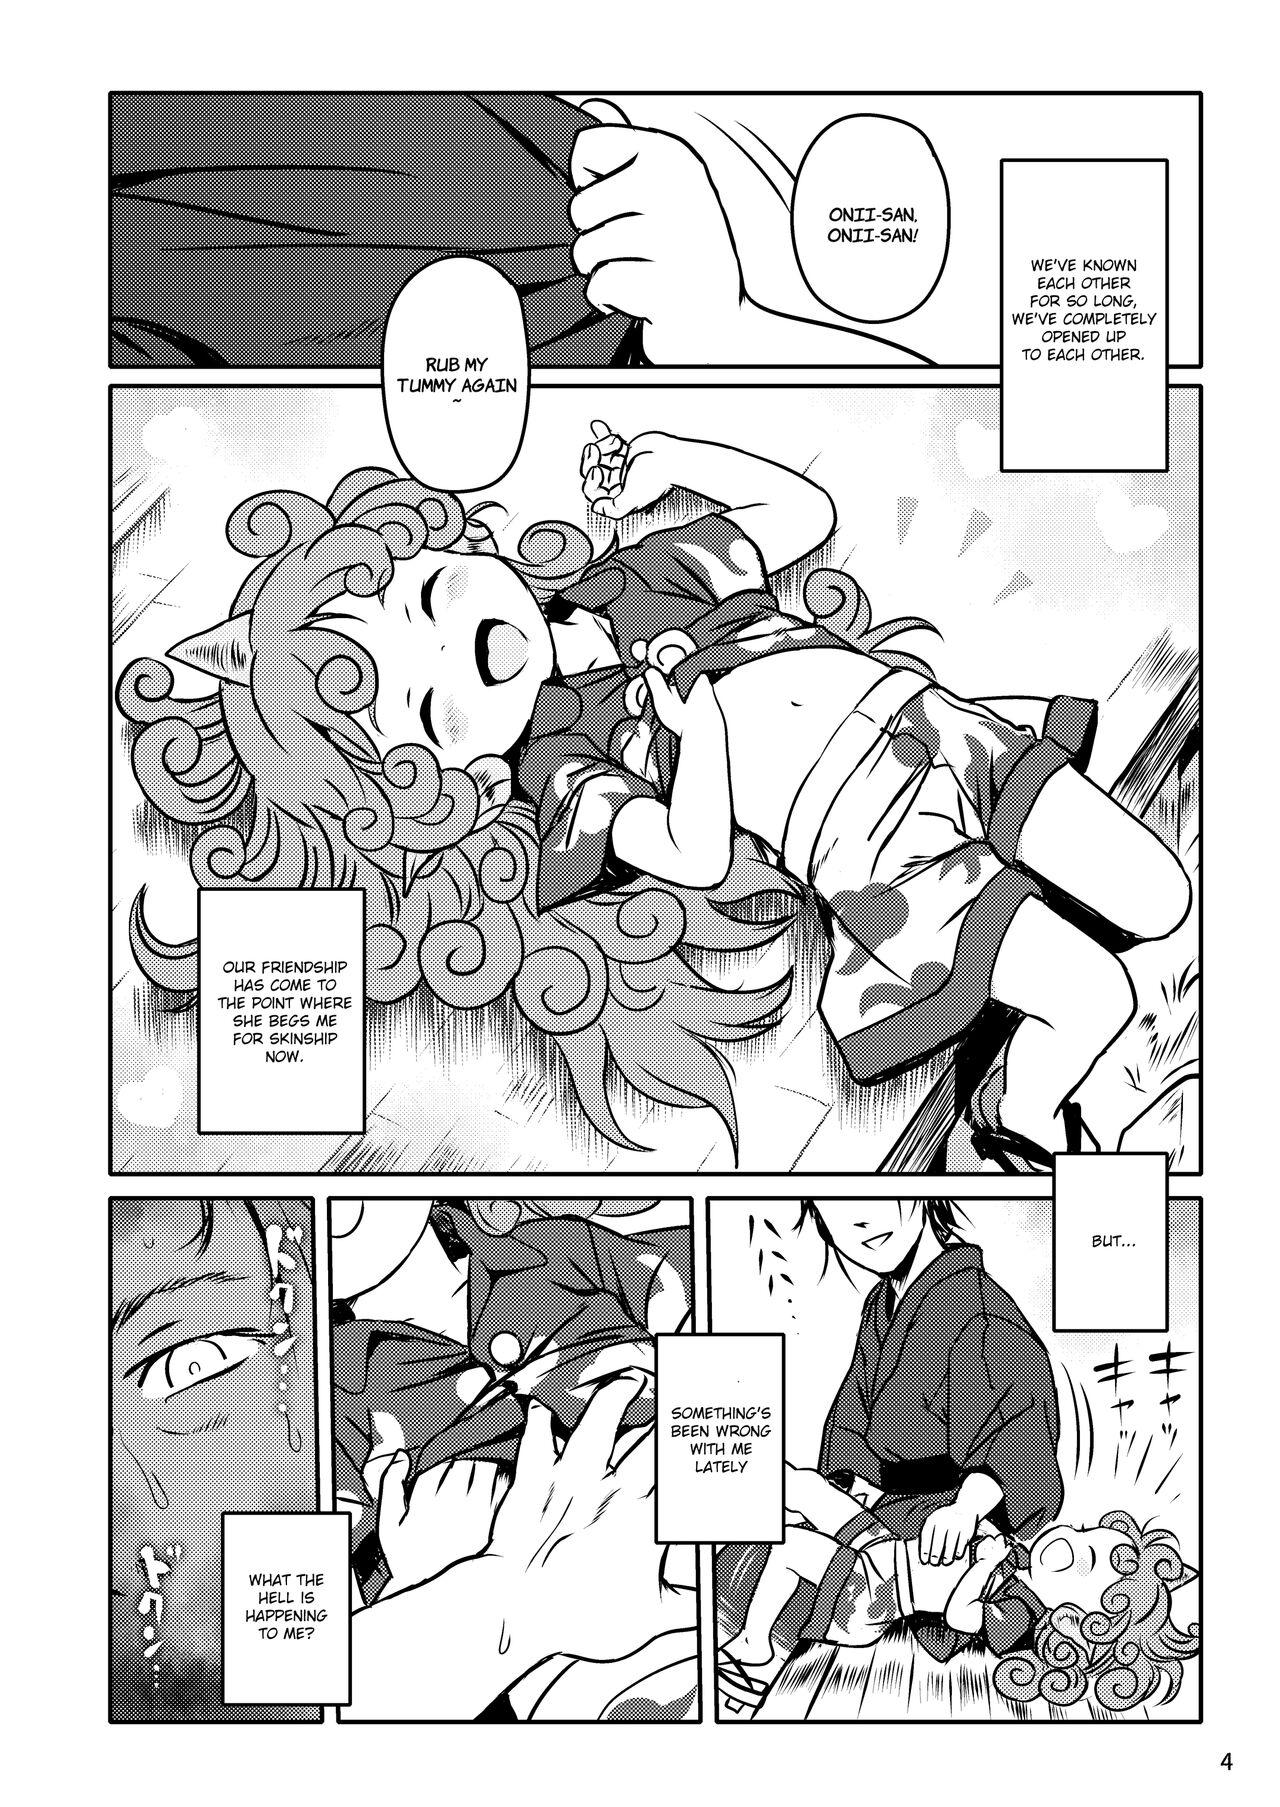 Tit Haratte! Aun-chan! - Touhou project Leaked - Page 4